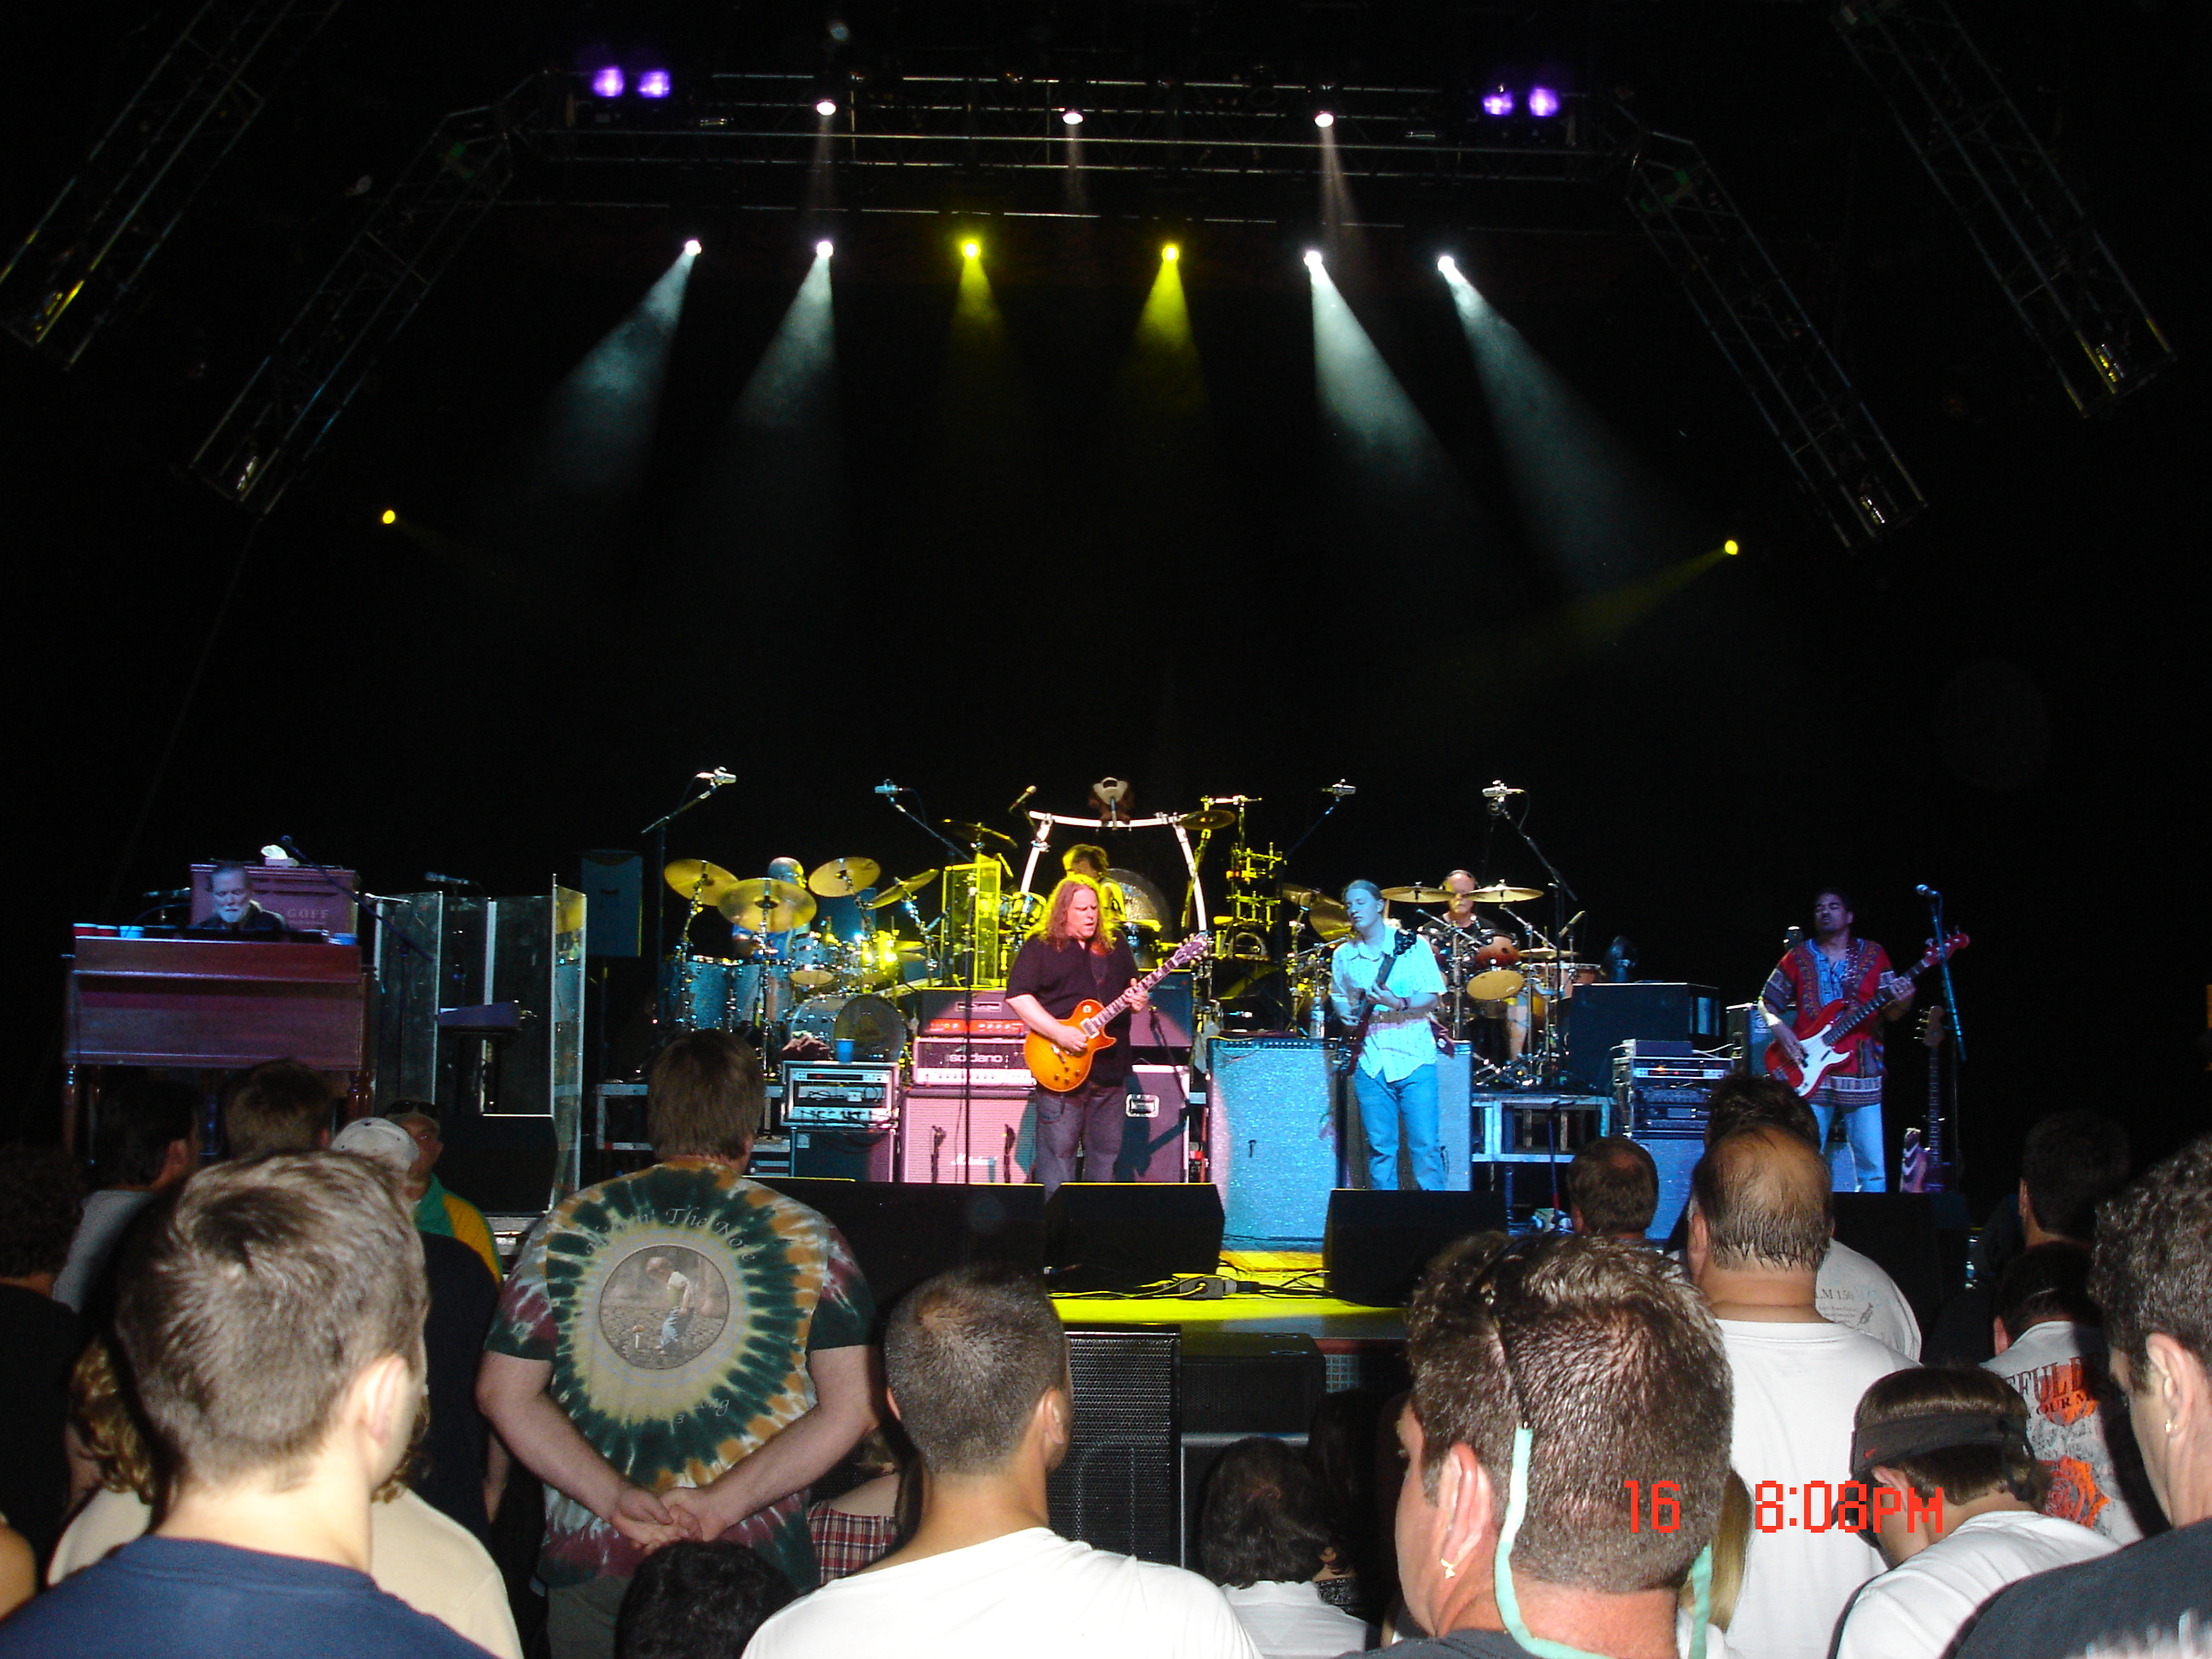 16 Jun 06 Riverbend Music Center Cincinnati, OH   Allman Brothers Band onstage, good picture of the entire stage, my younger son's first ABB show!!!!